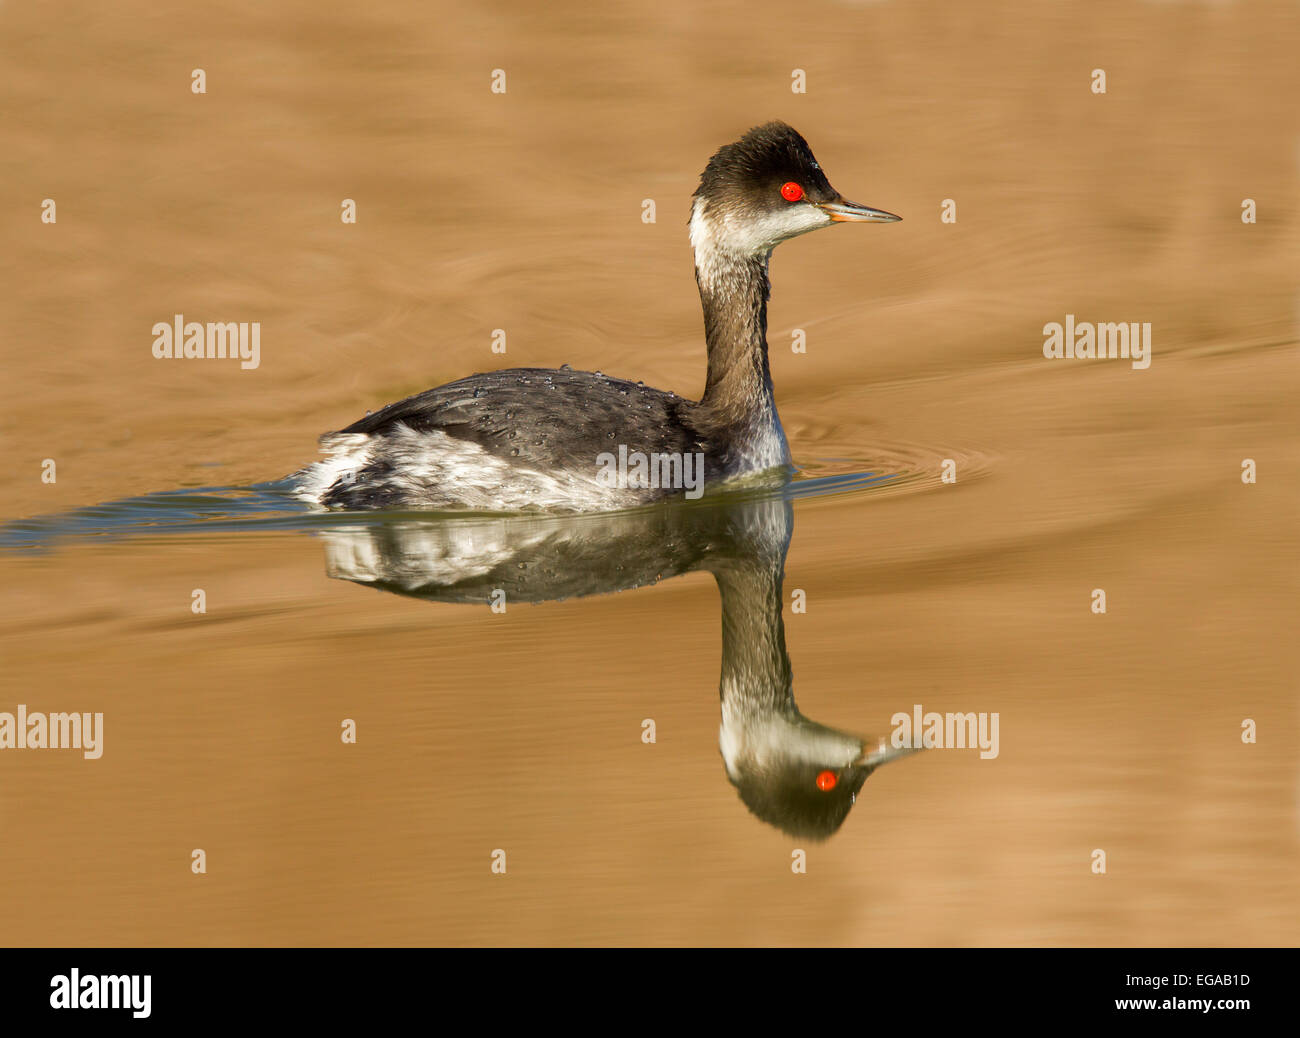 Eared Grebe  Podiceps nigricollis  McNeal, Cochise County, Arizona, United States  9 January         Adult in winter plumage. Stock Photo